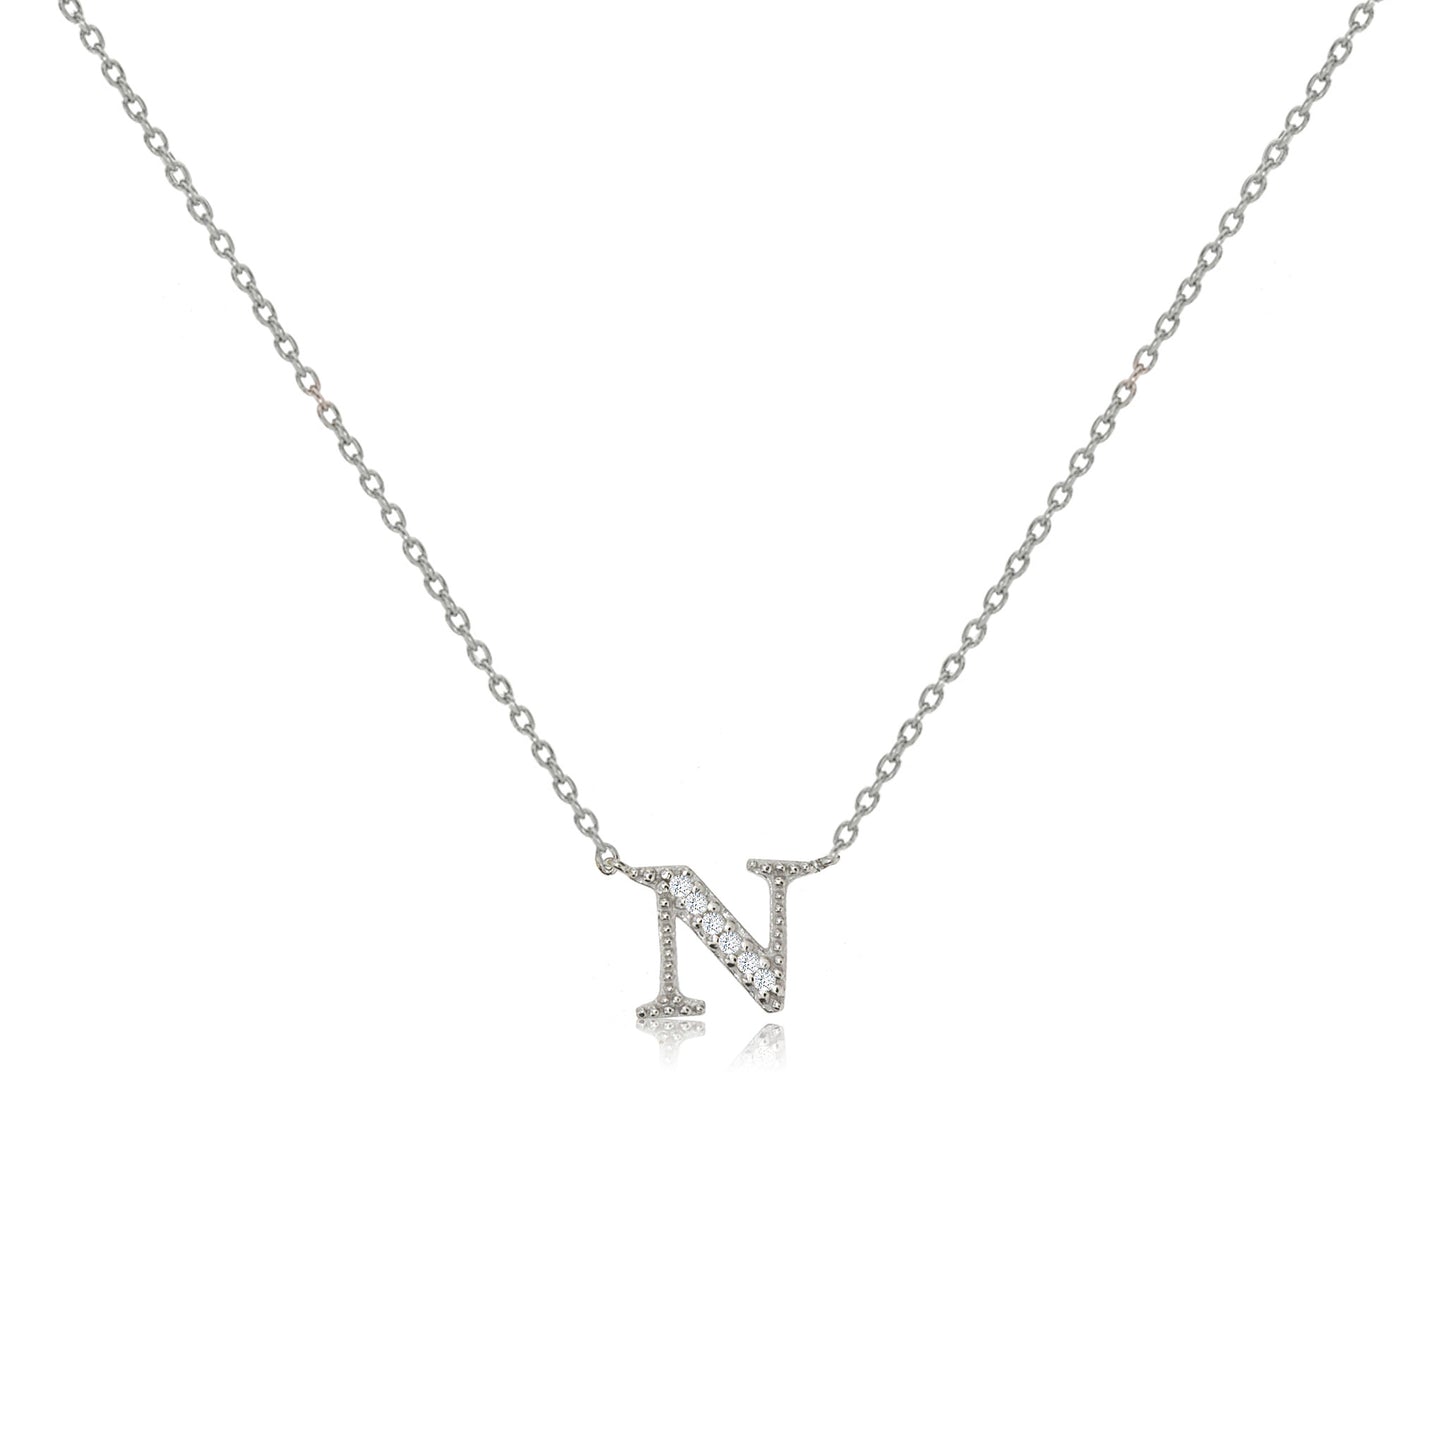 
Sterling silver initial necklace featuring an 'N' pendant decorated with cubic zirconia stones on an adjustable chain.

